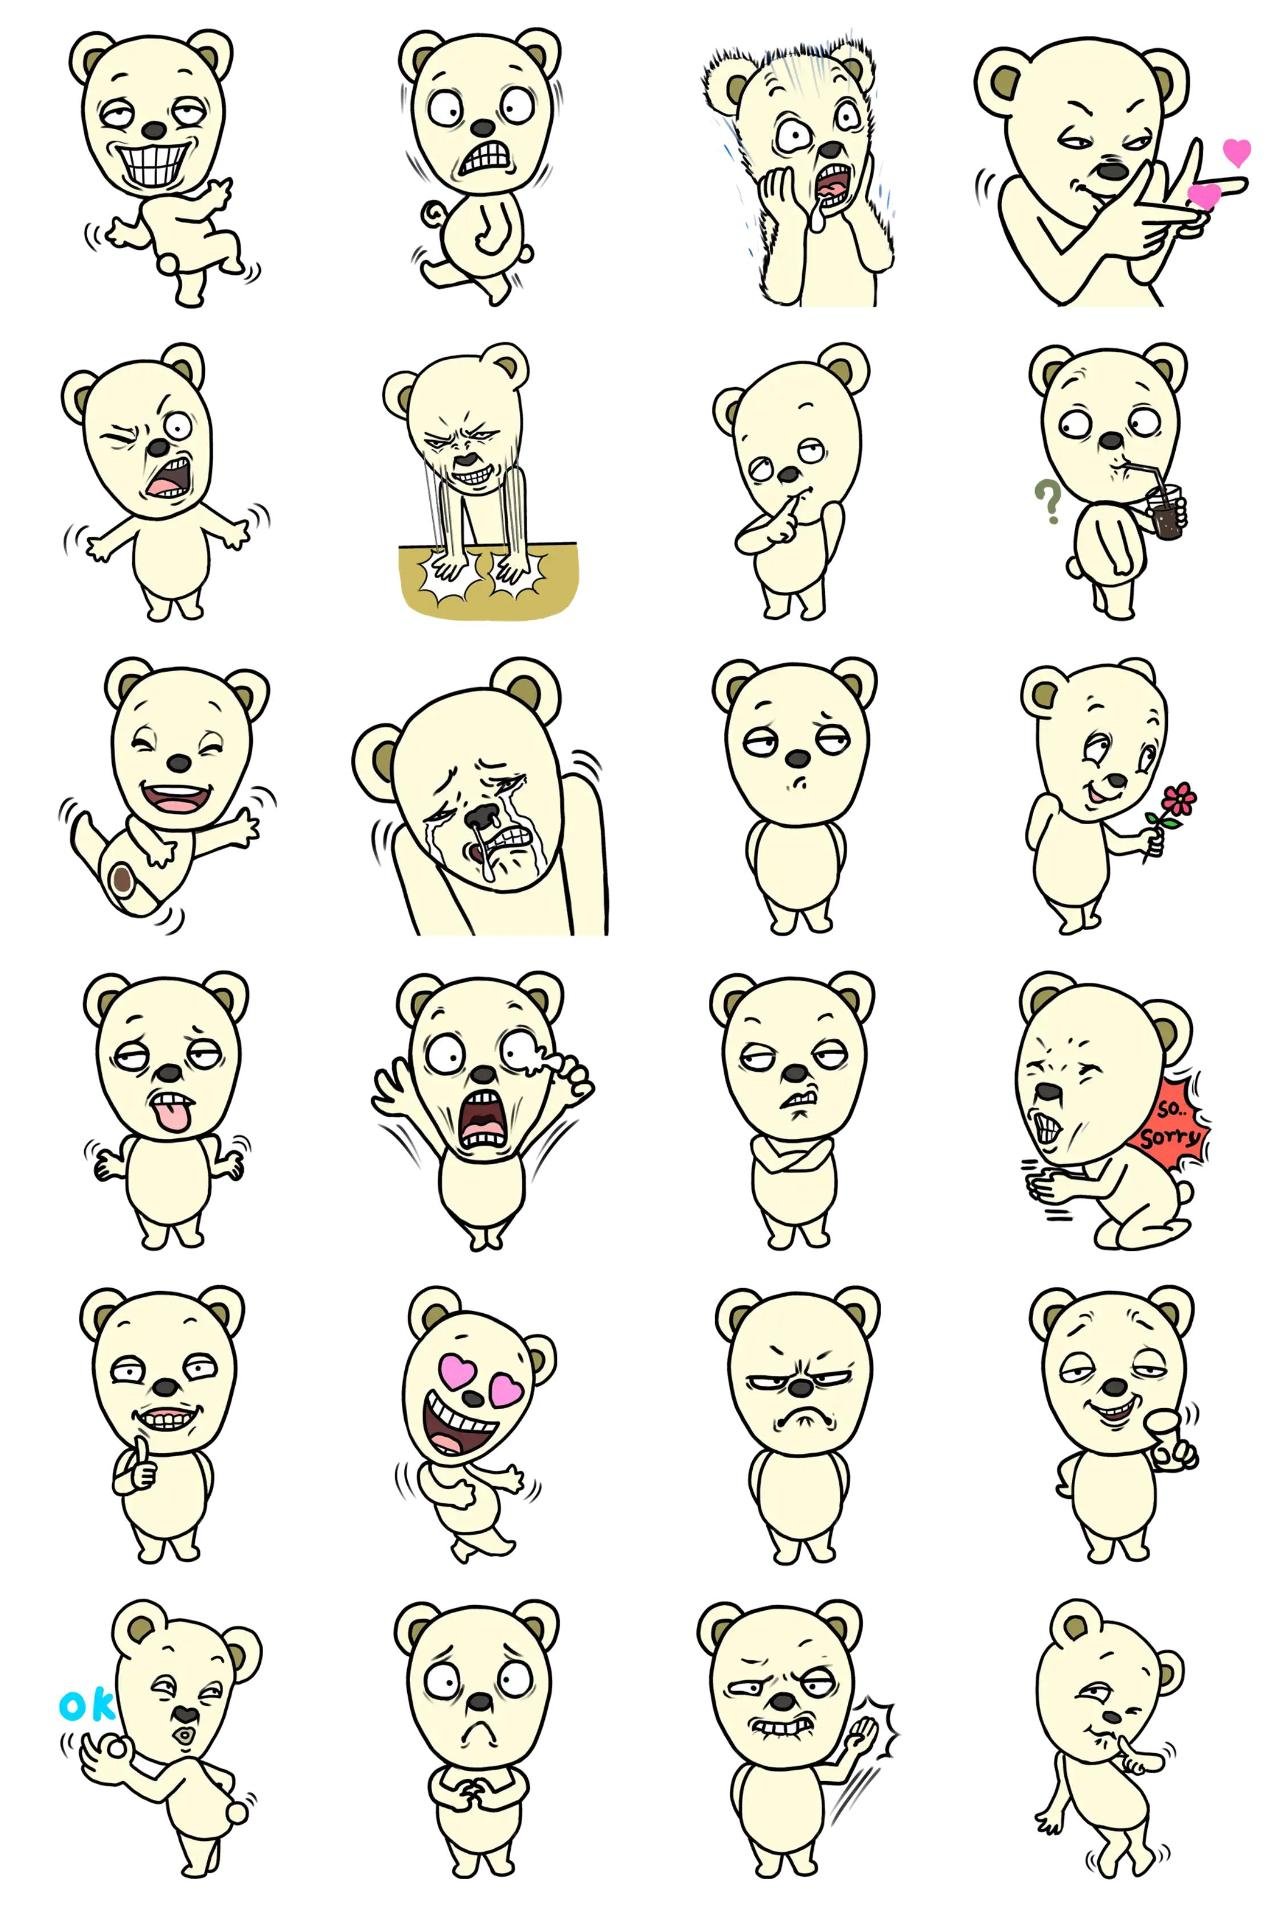 Yellow bear in happy mood Animals sticker pack for Whatsapp, Telegram, Signal, and others chatting and message apps